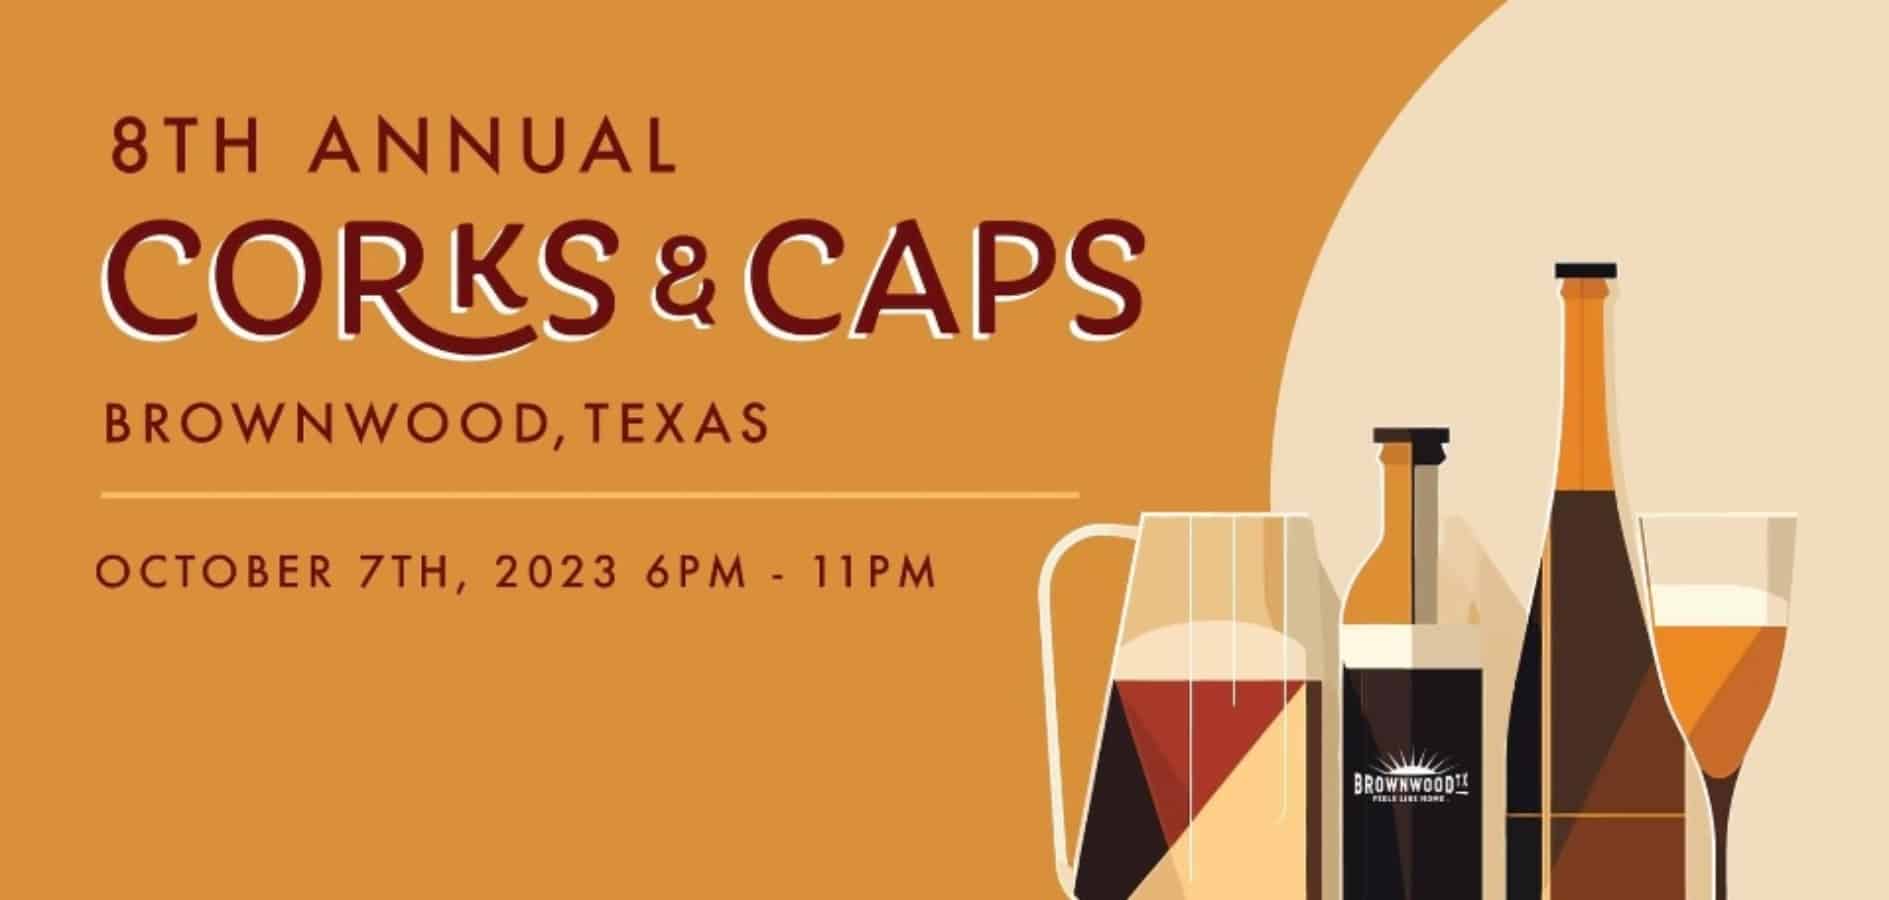 Poster for Corks & Caps 